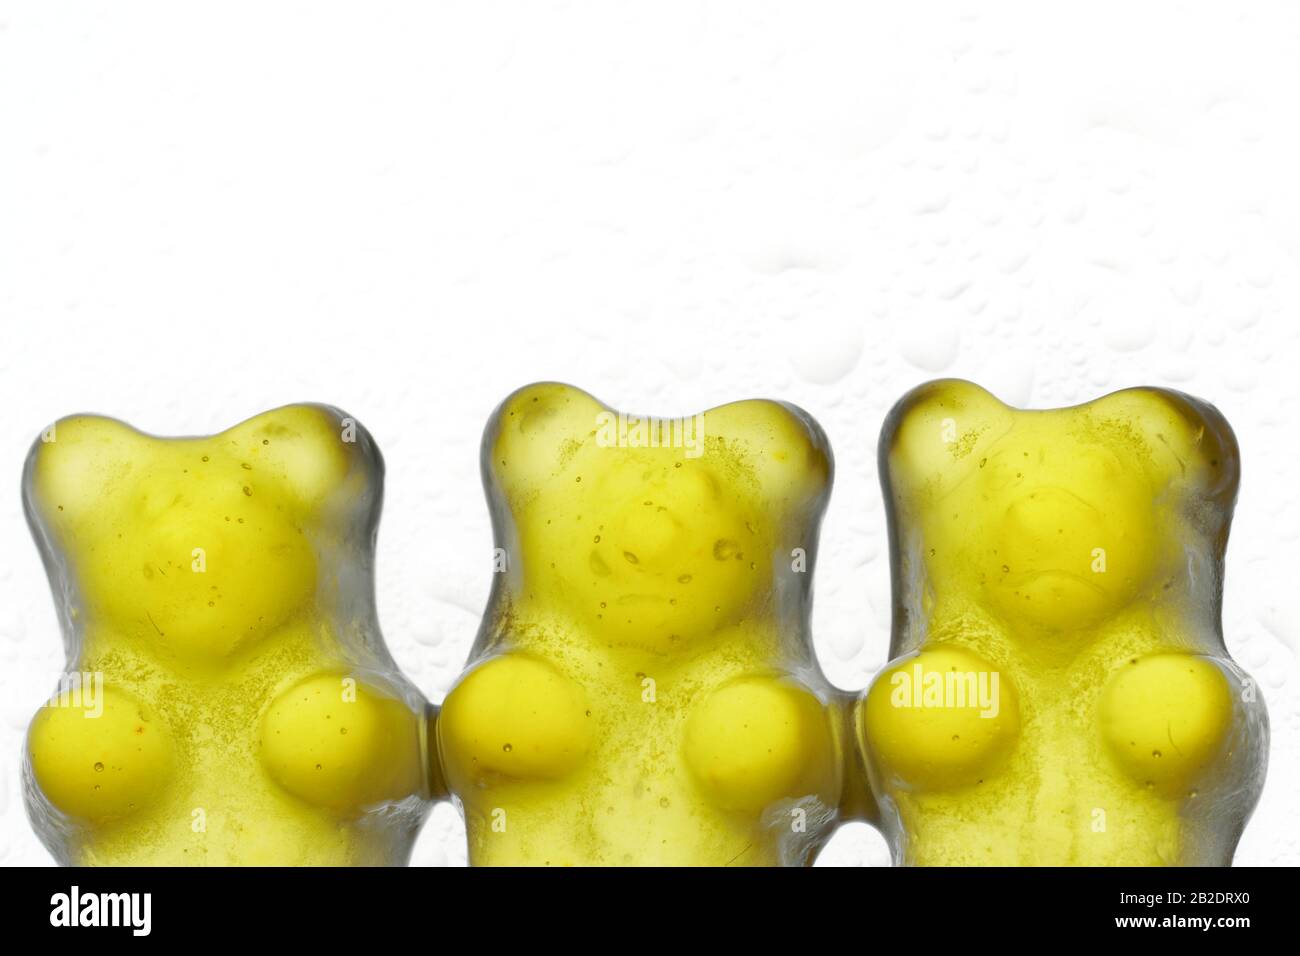 Yellow jelly bear candy aligned on a white background Stock Photo